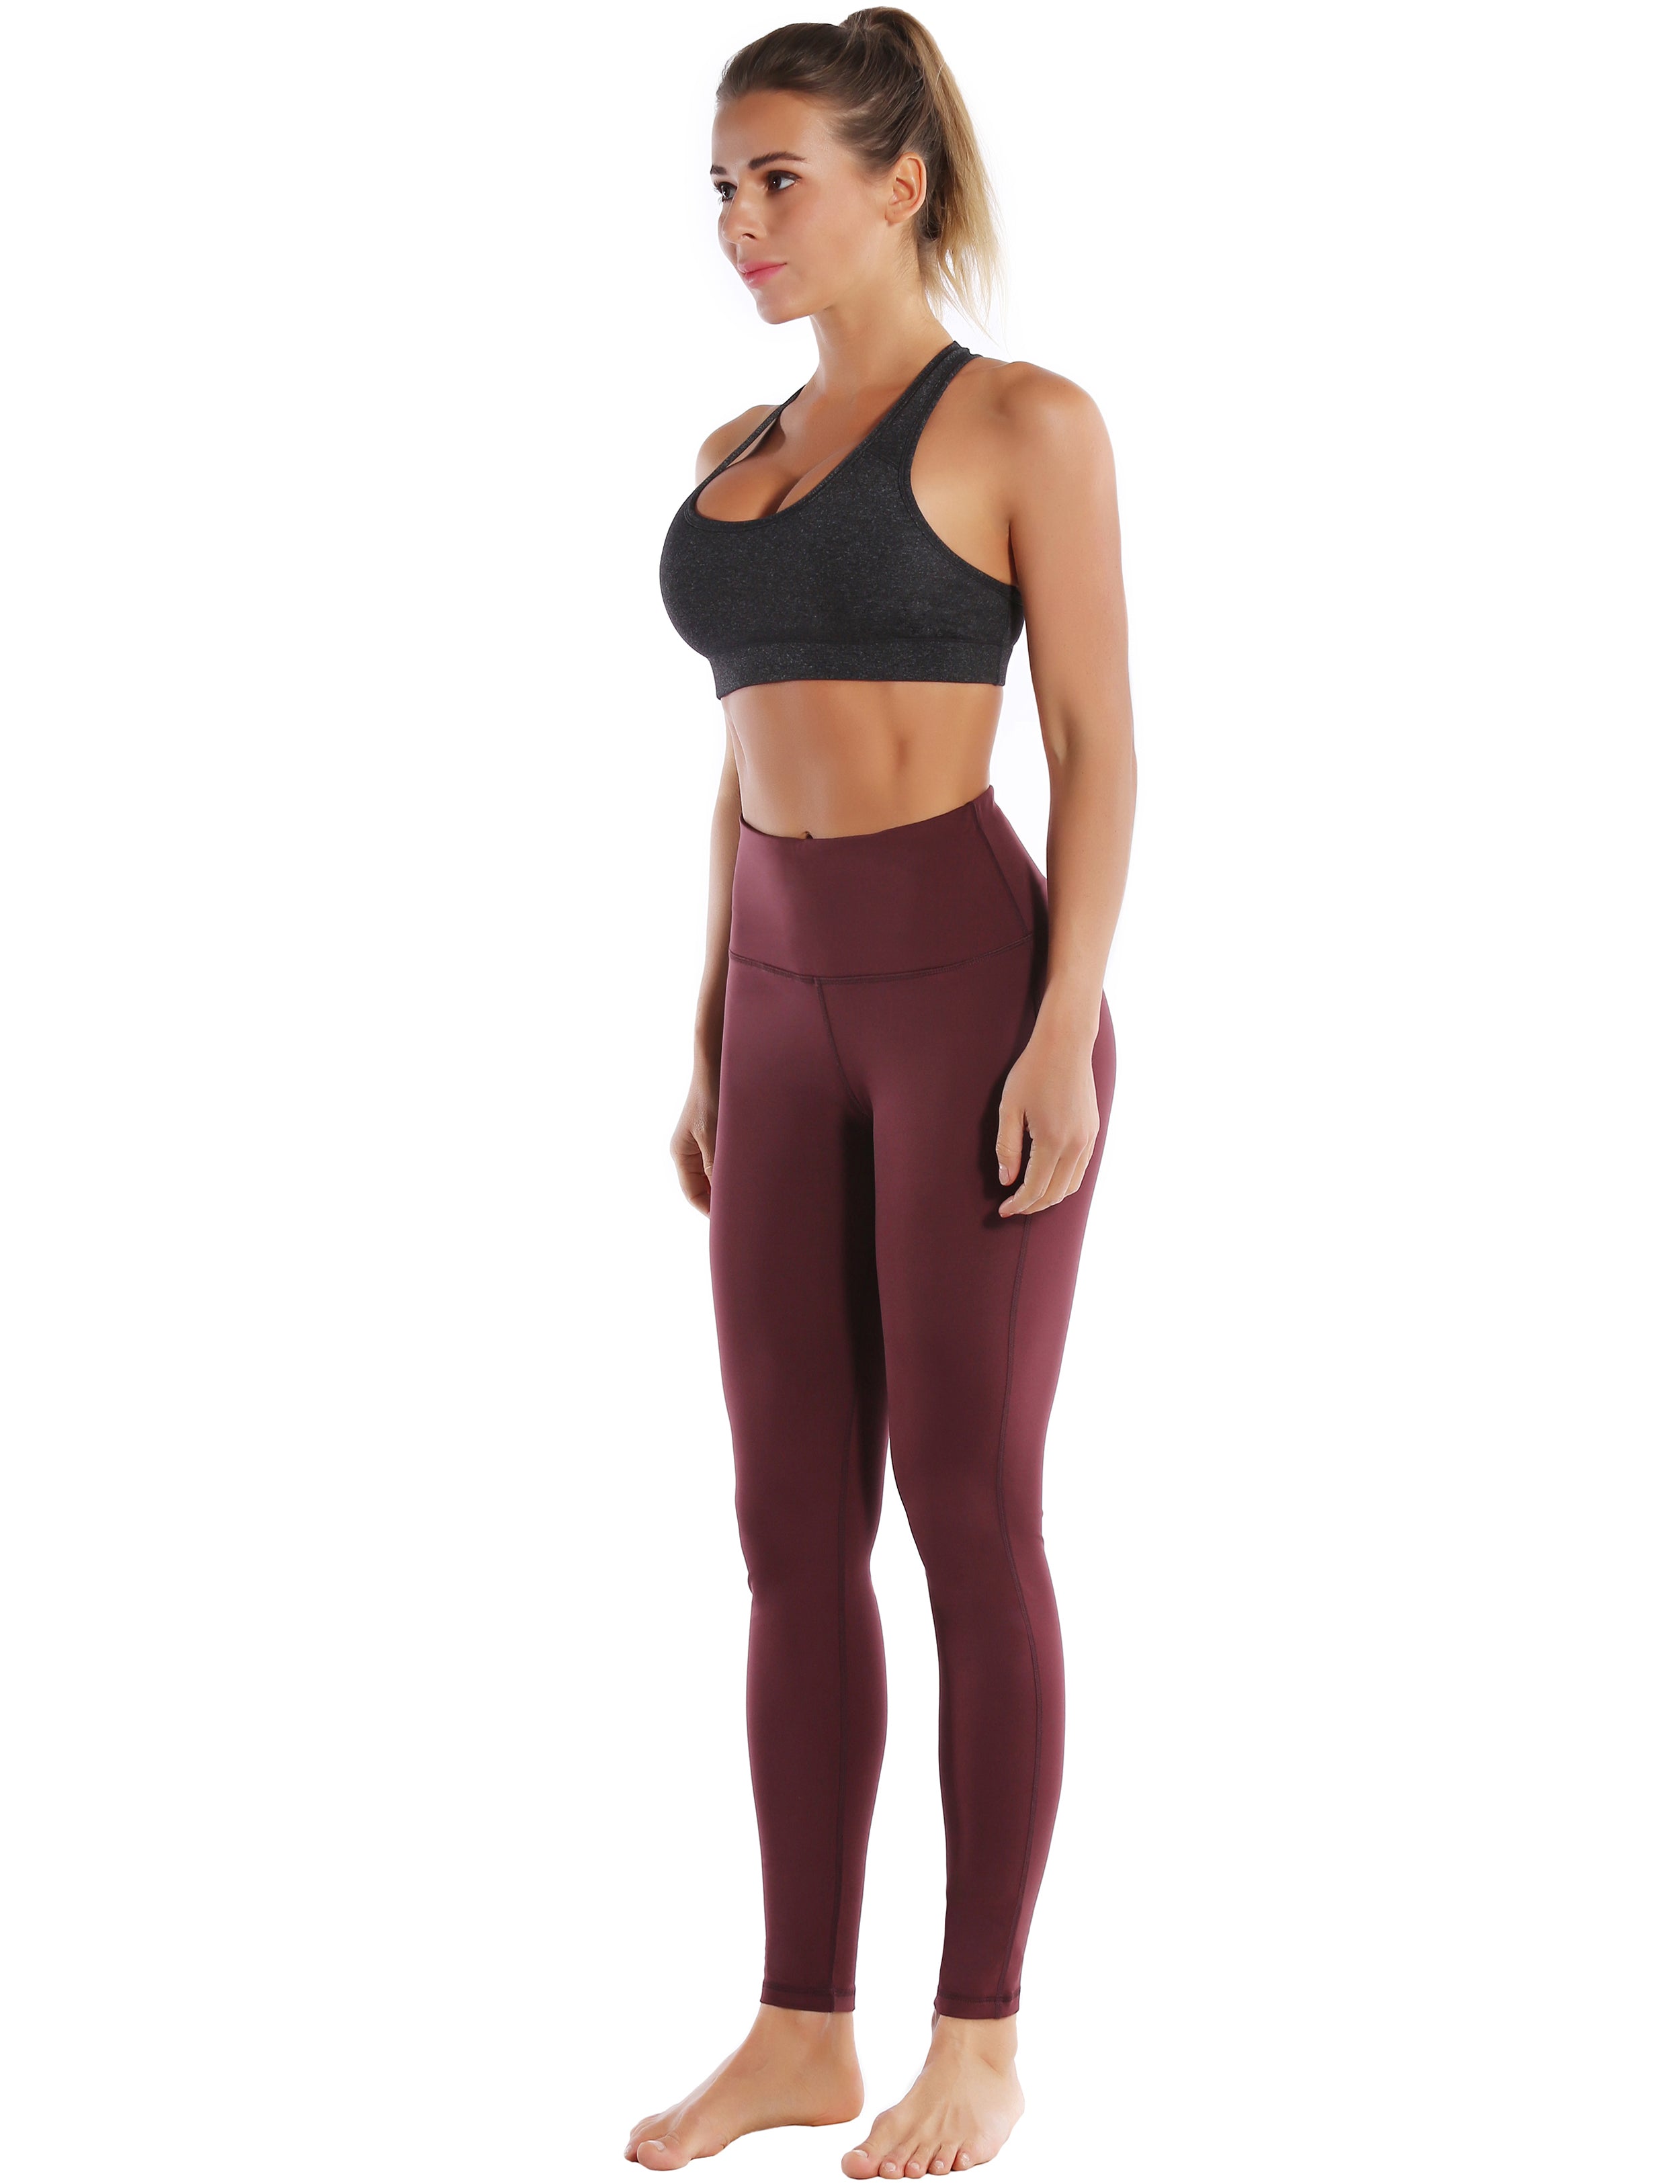 Compression Racerback Sports Bras heathercharcoal ins_Running